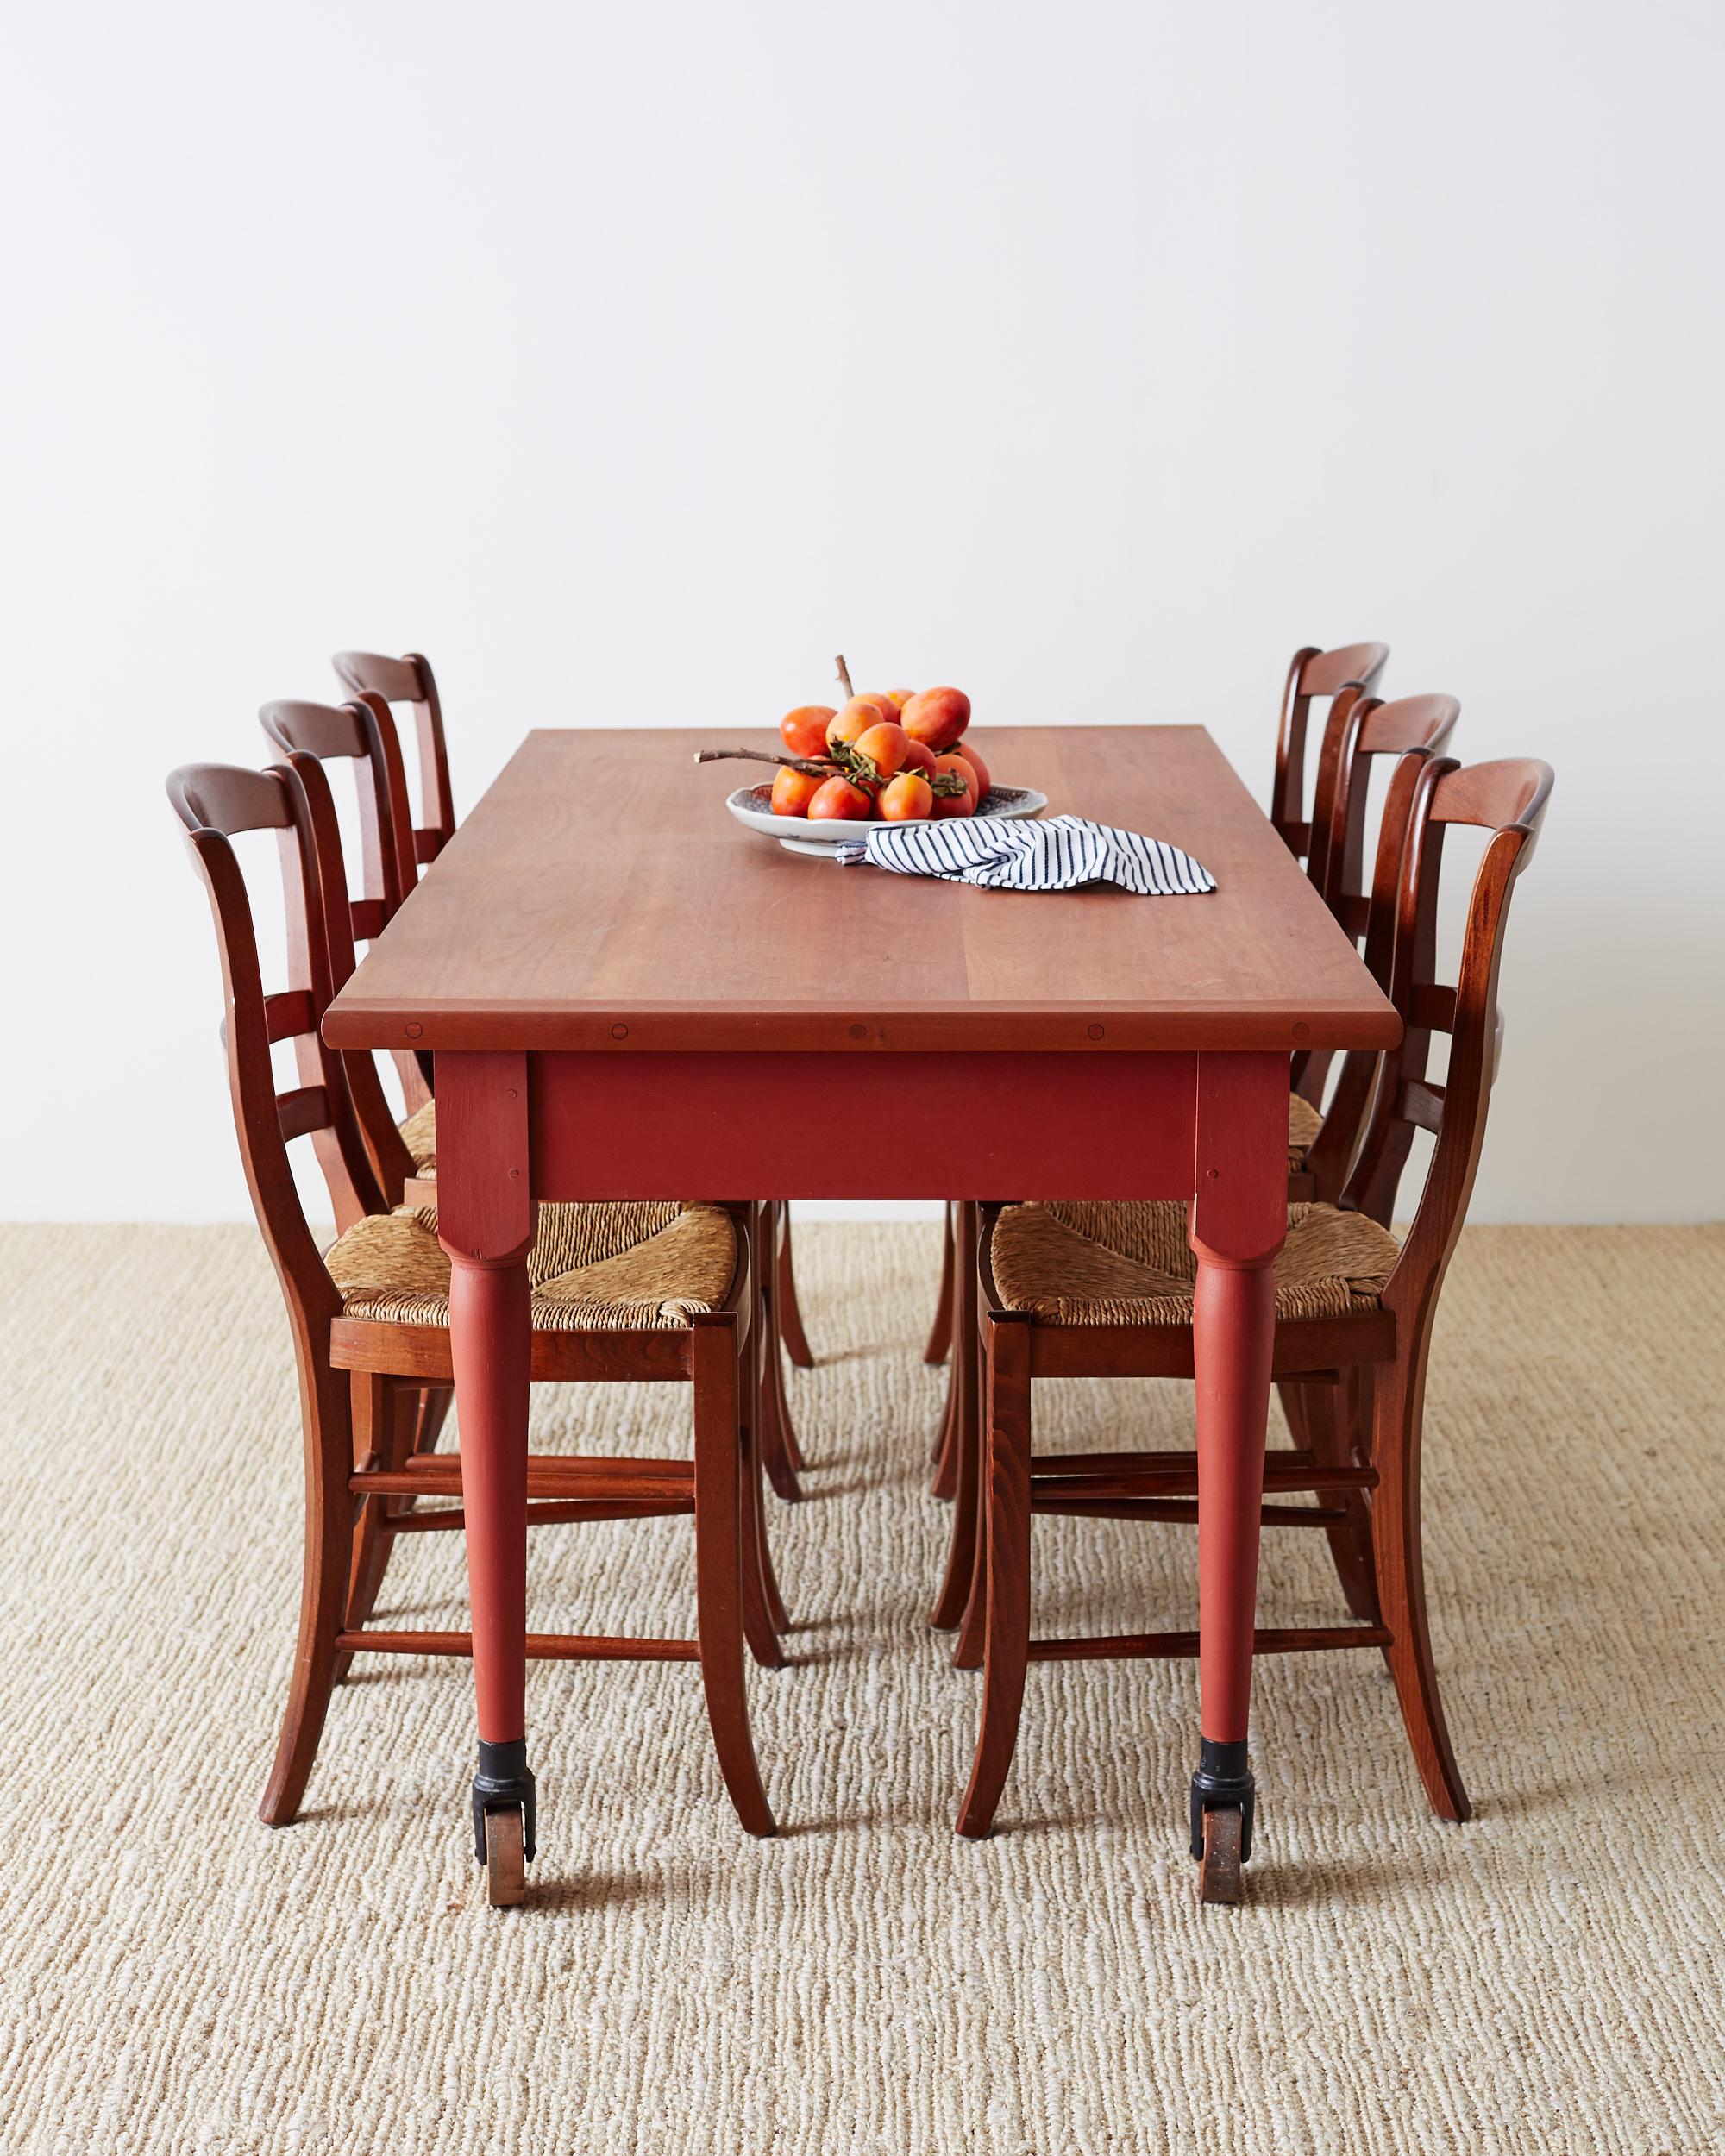 Country style set of six ladder-back dining chairs featuring a hand-woven rush seat. Contemporary chairs made with an ergonomic curved back and a distinct vintage profile. Finished in a rich stain to accent the lighter woven seat.
